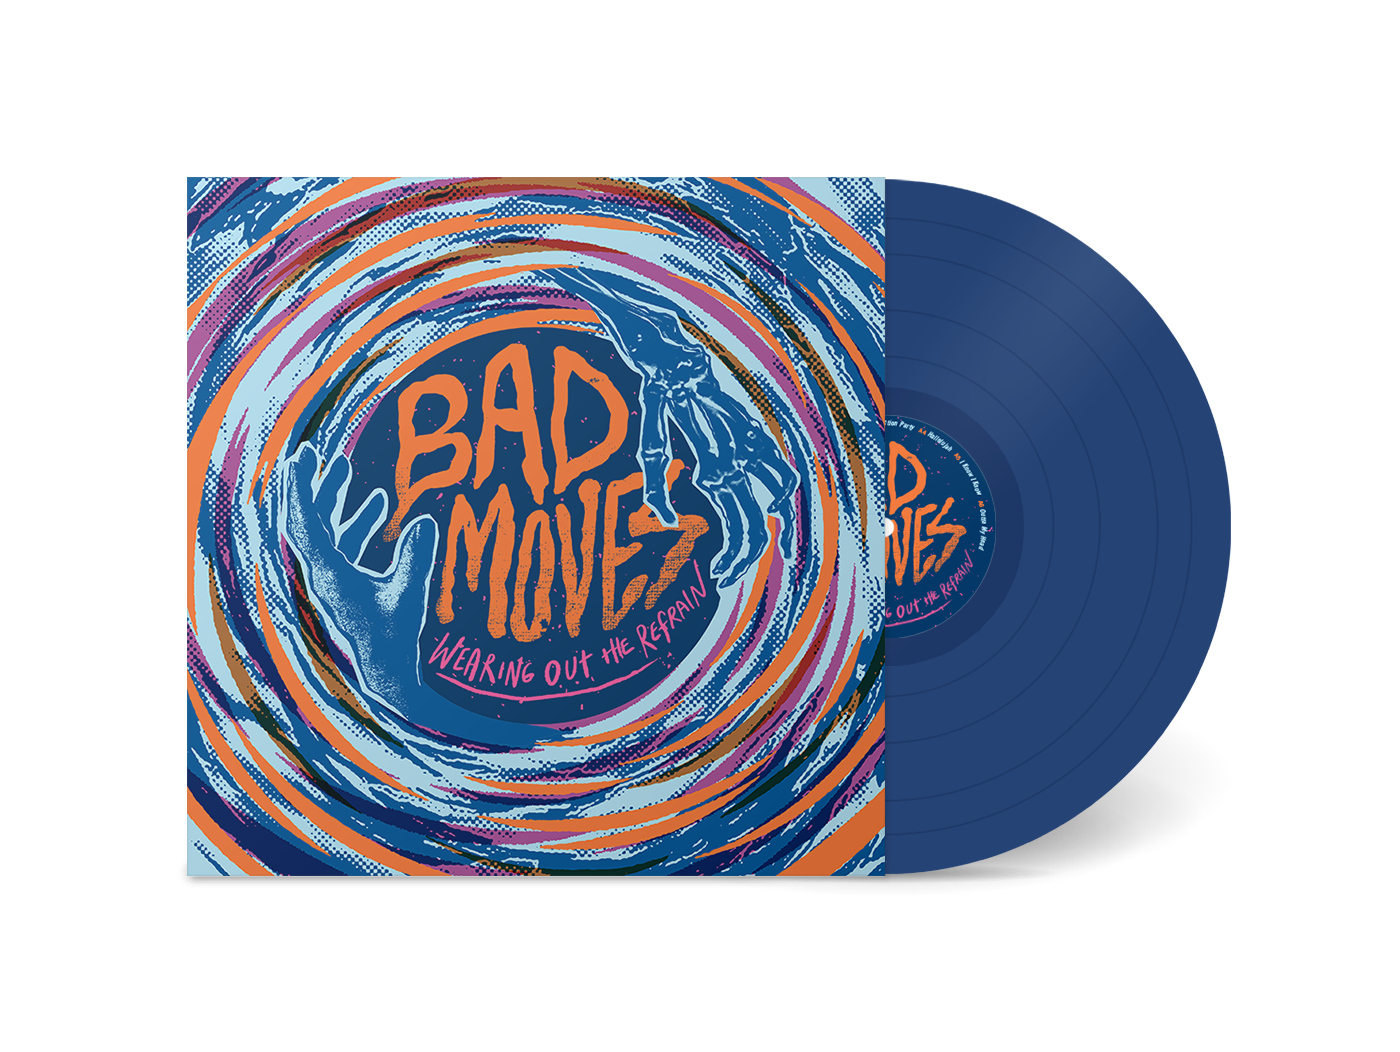 Bad Moves "Wearing Out The Refrain" 12"